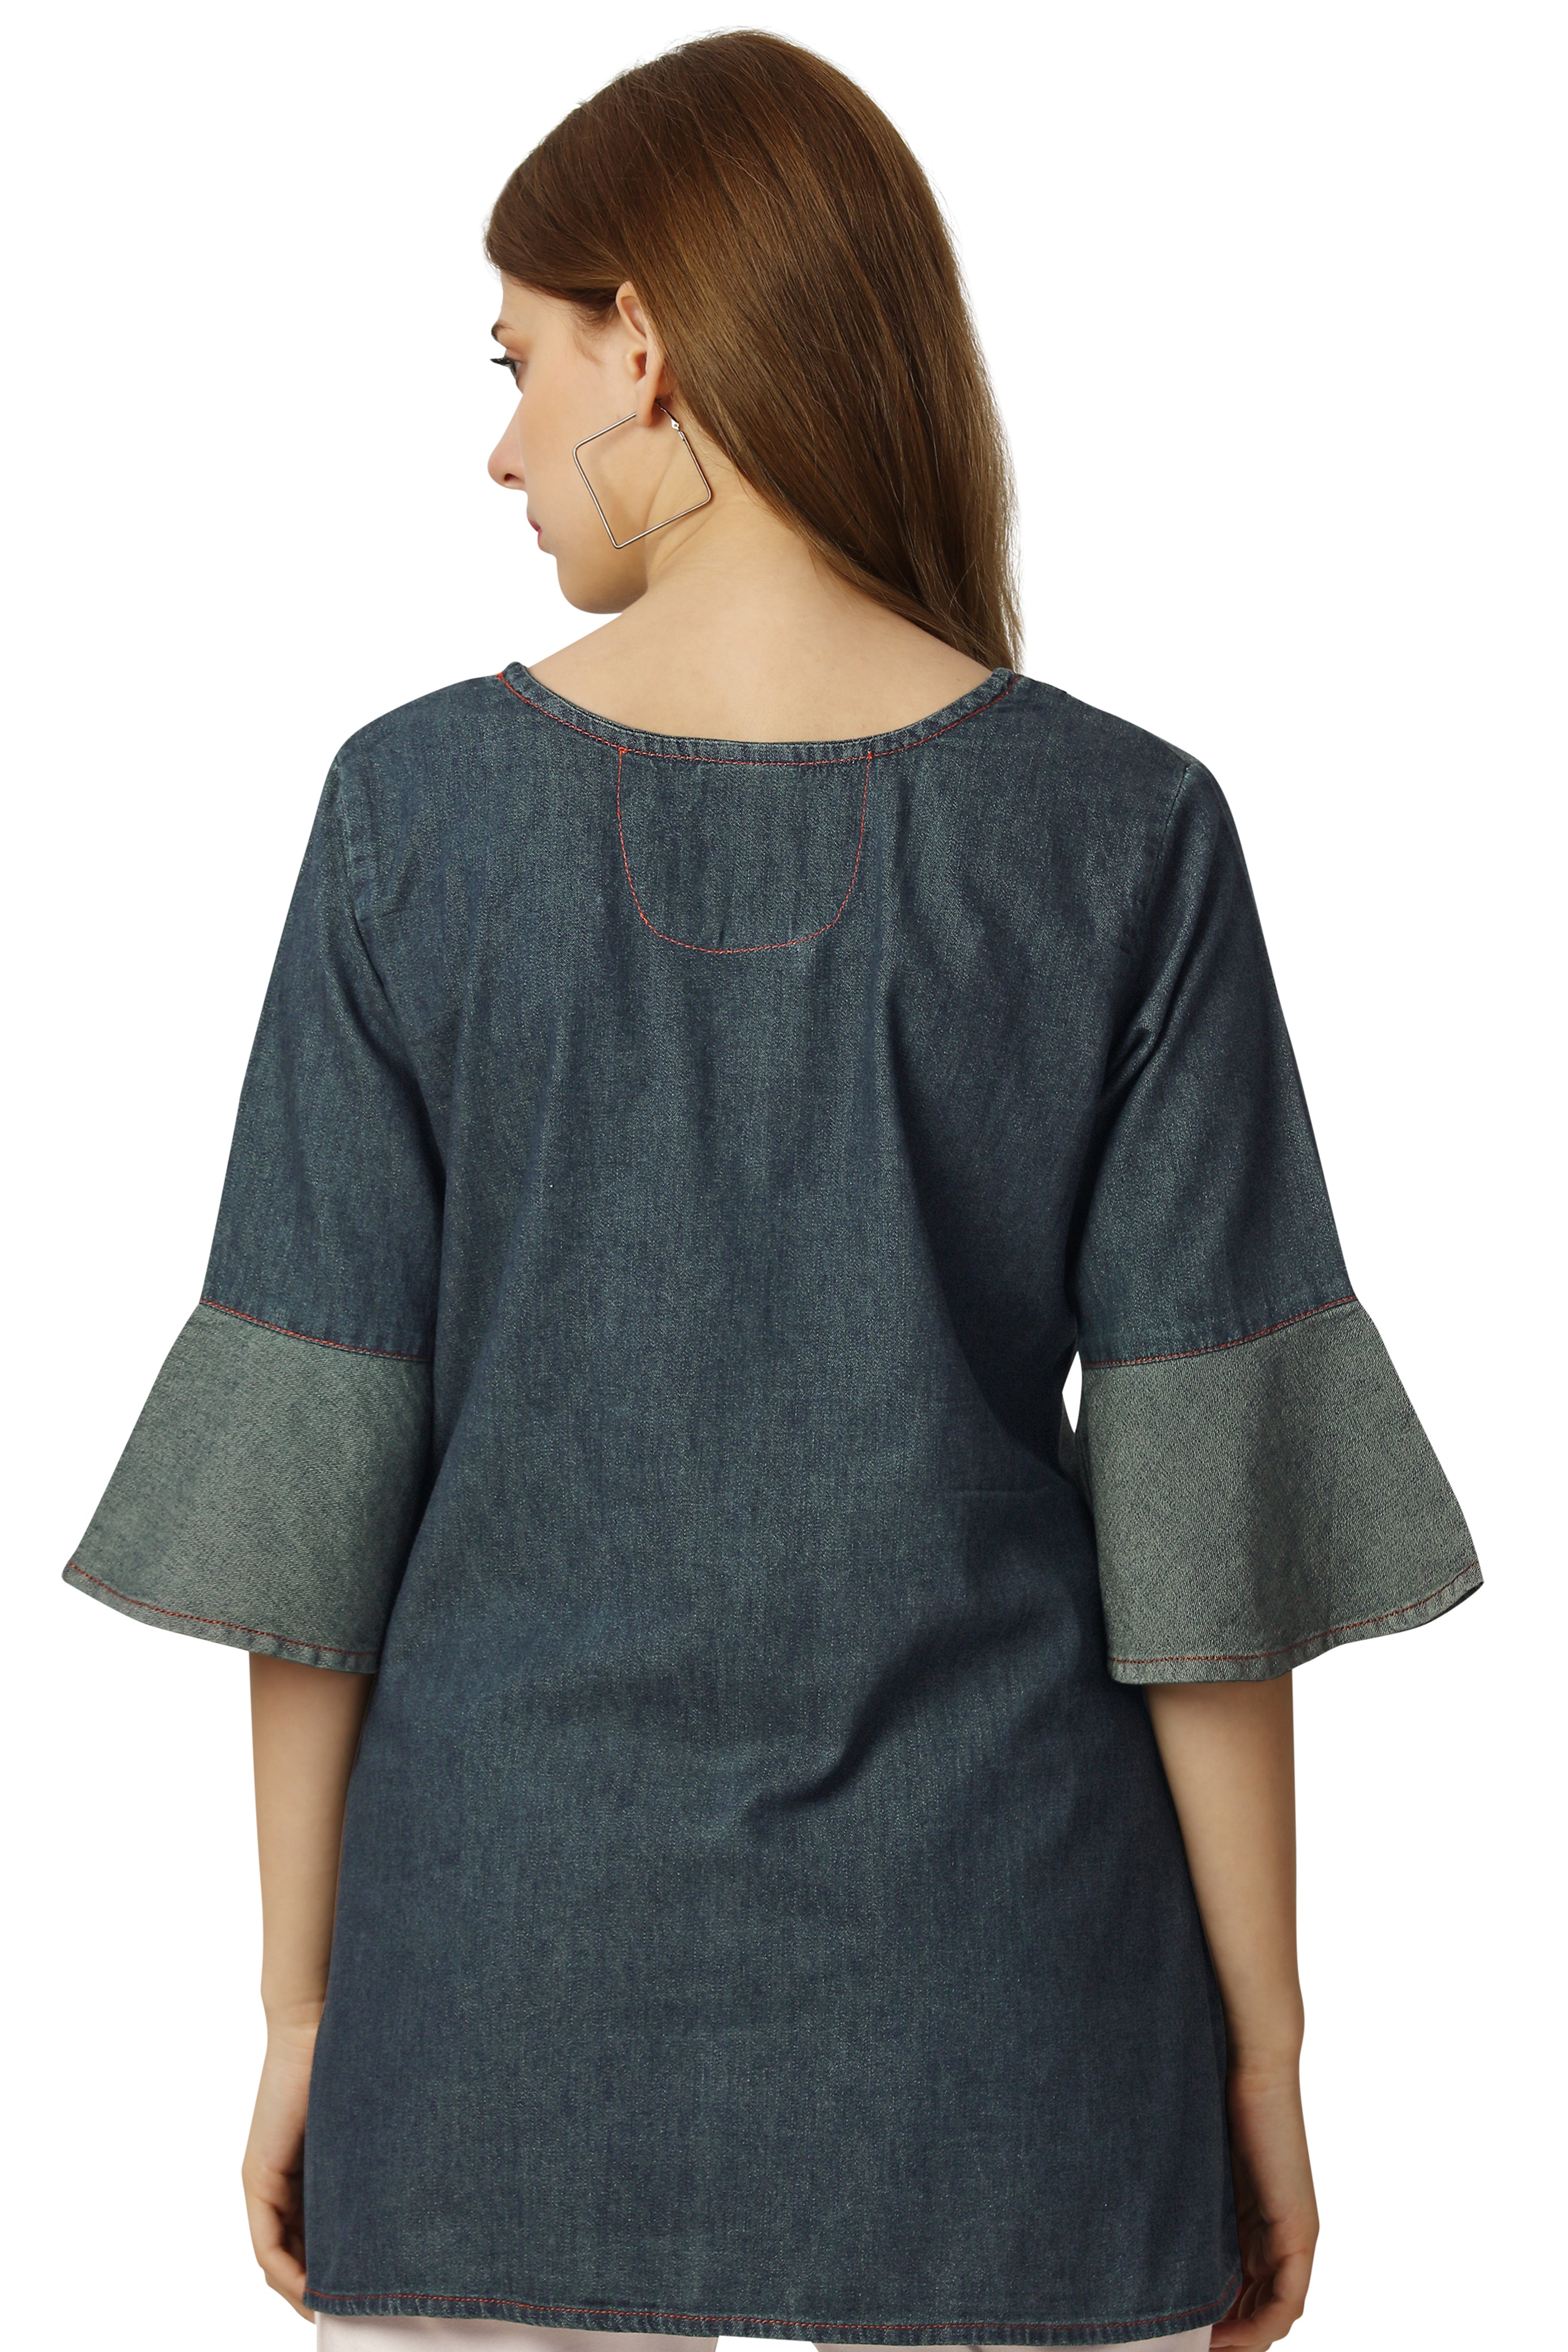 Fuscous Gray with Multicolour Stitched Denim Top